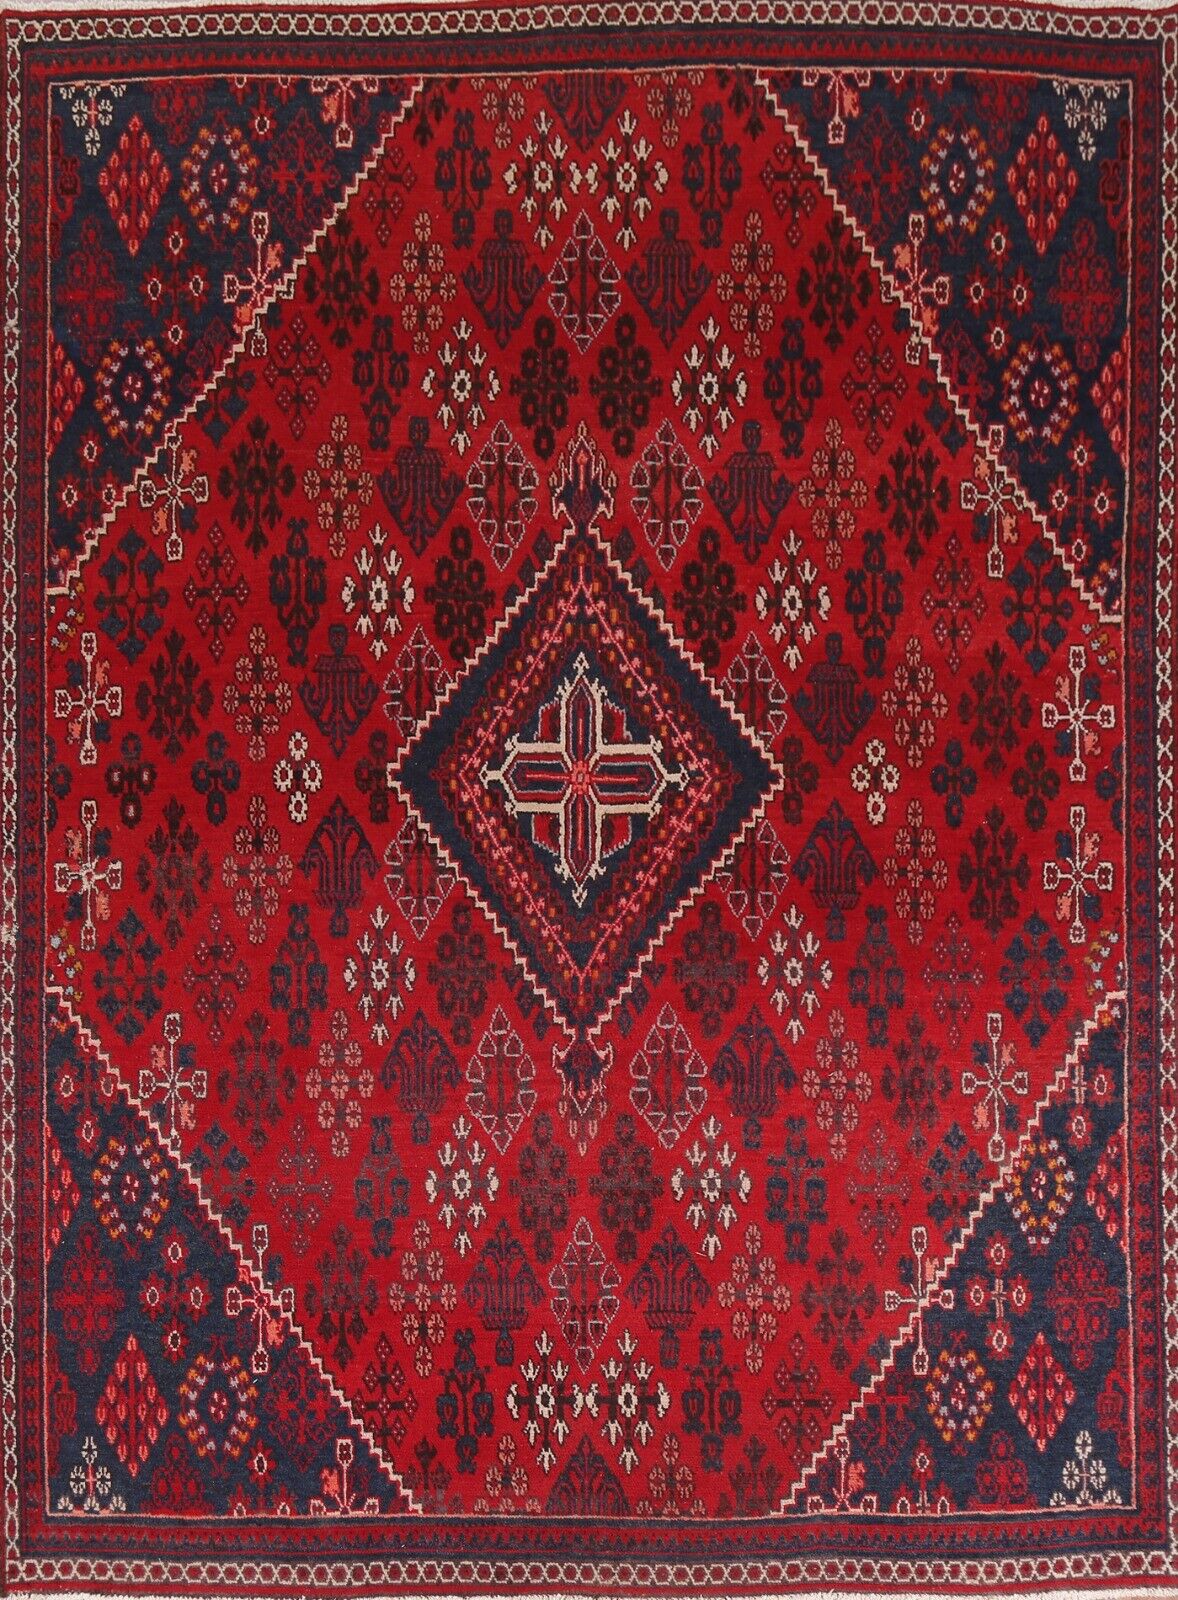 Antique South-west Design Red Joshaghan 8'x10' Area Rug Hand-knotted Living Room